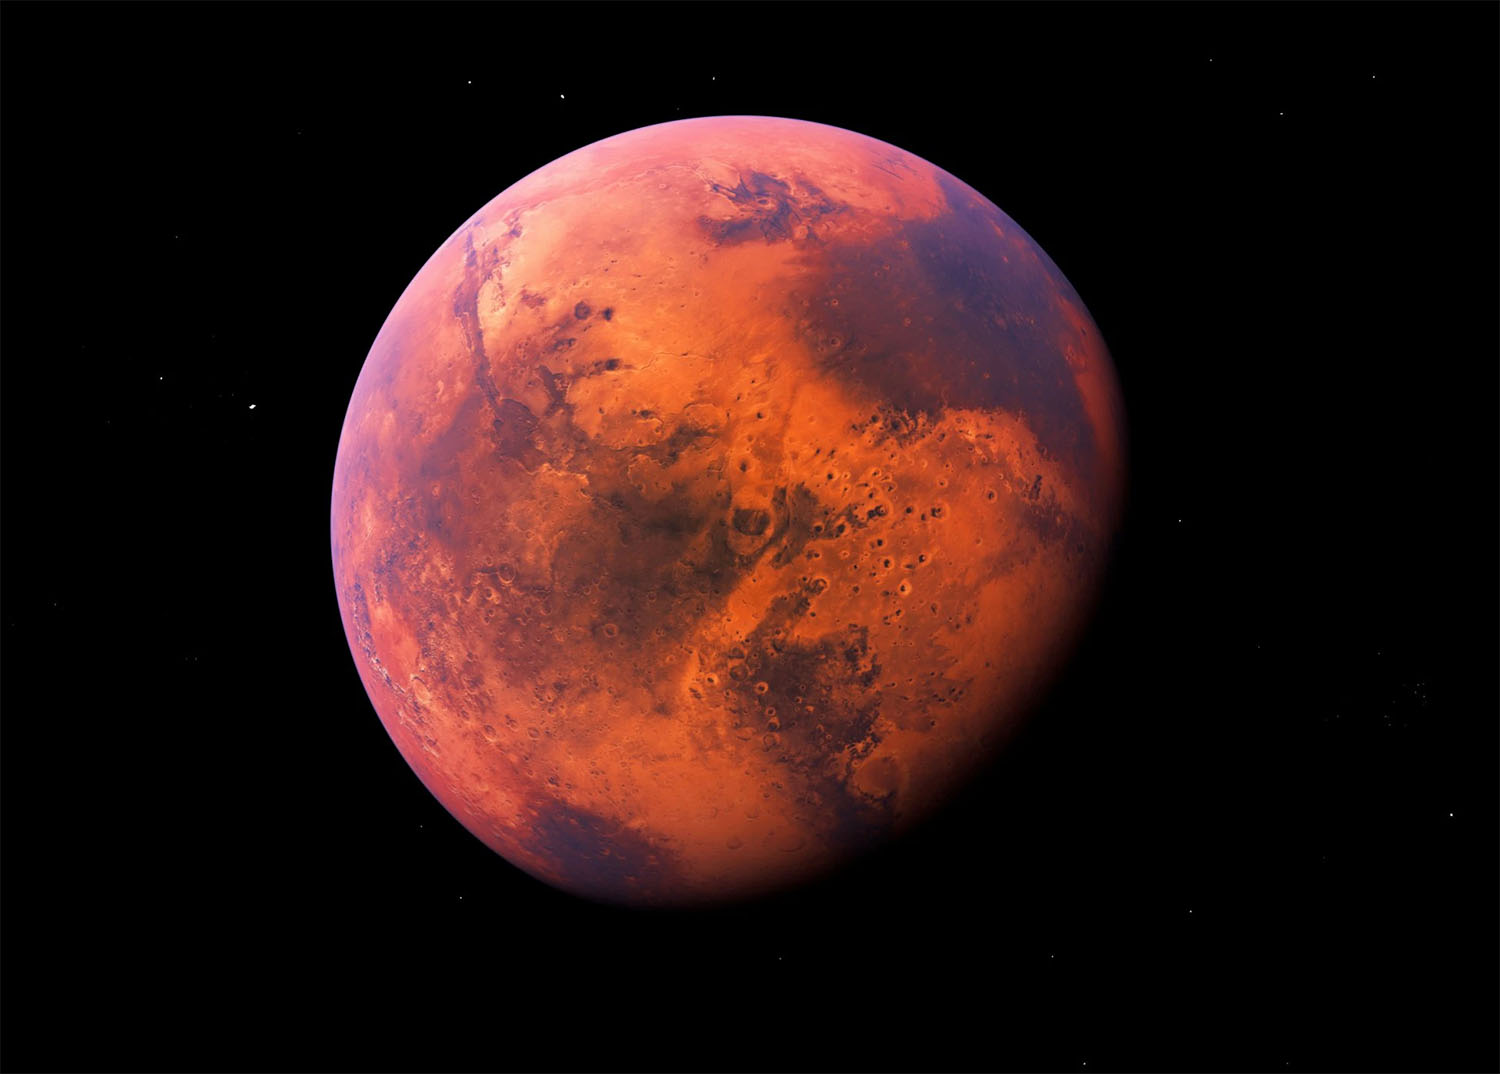 20 interesting facts about Mars